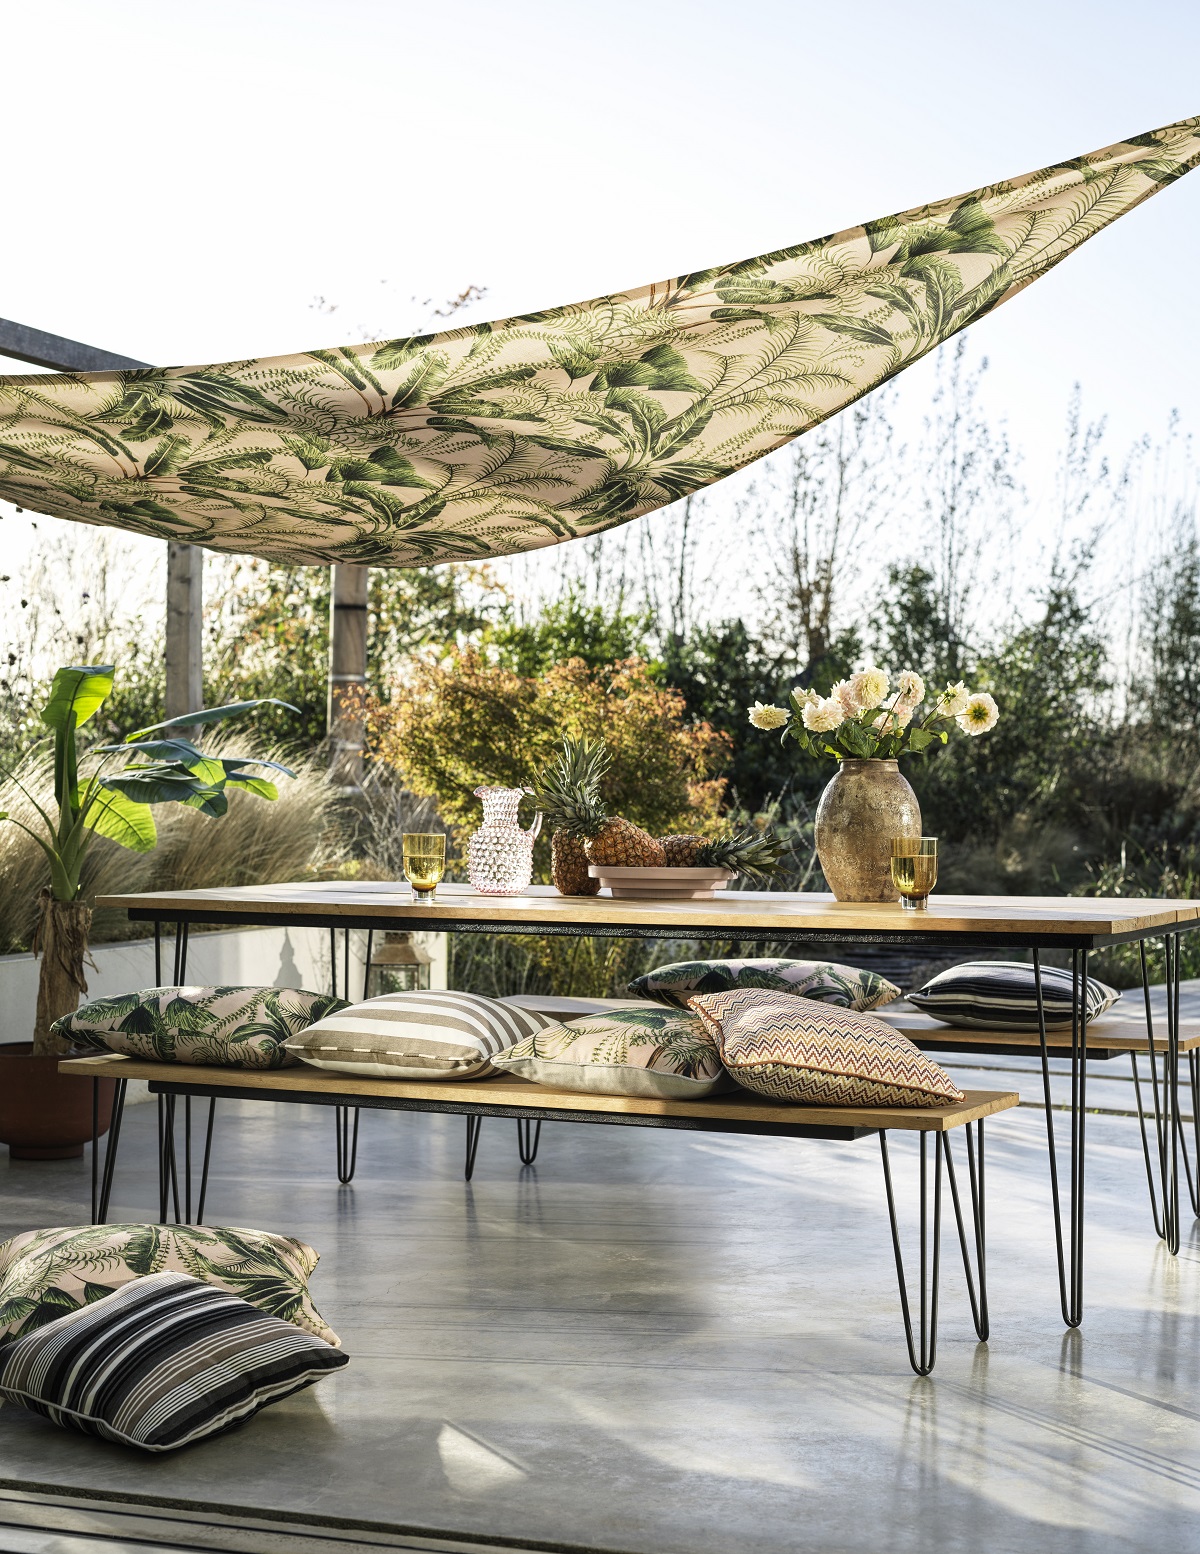 outdoor cushions and shade sail canopy all in a mix of botanical prints and stripes